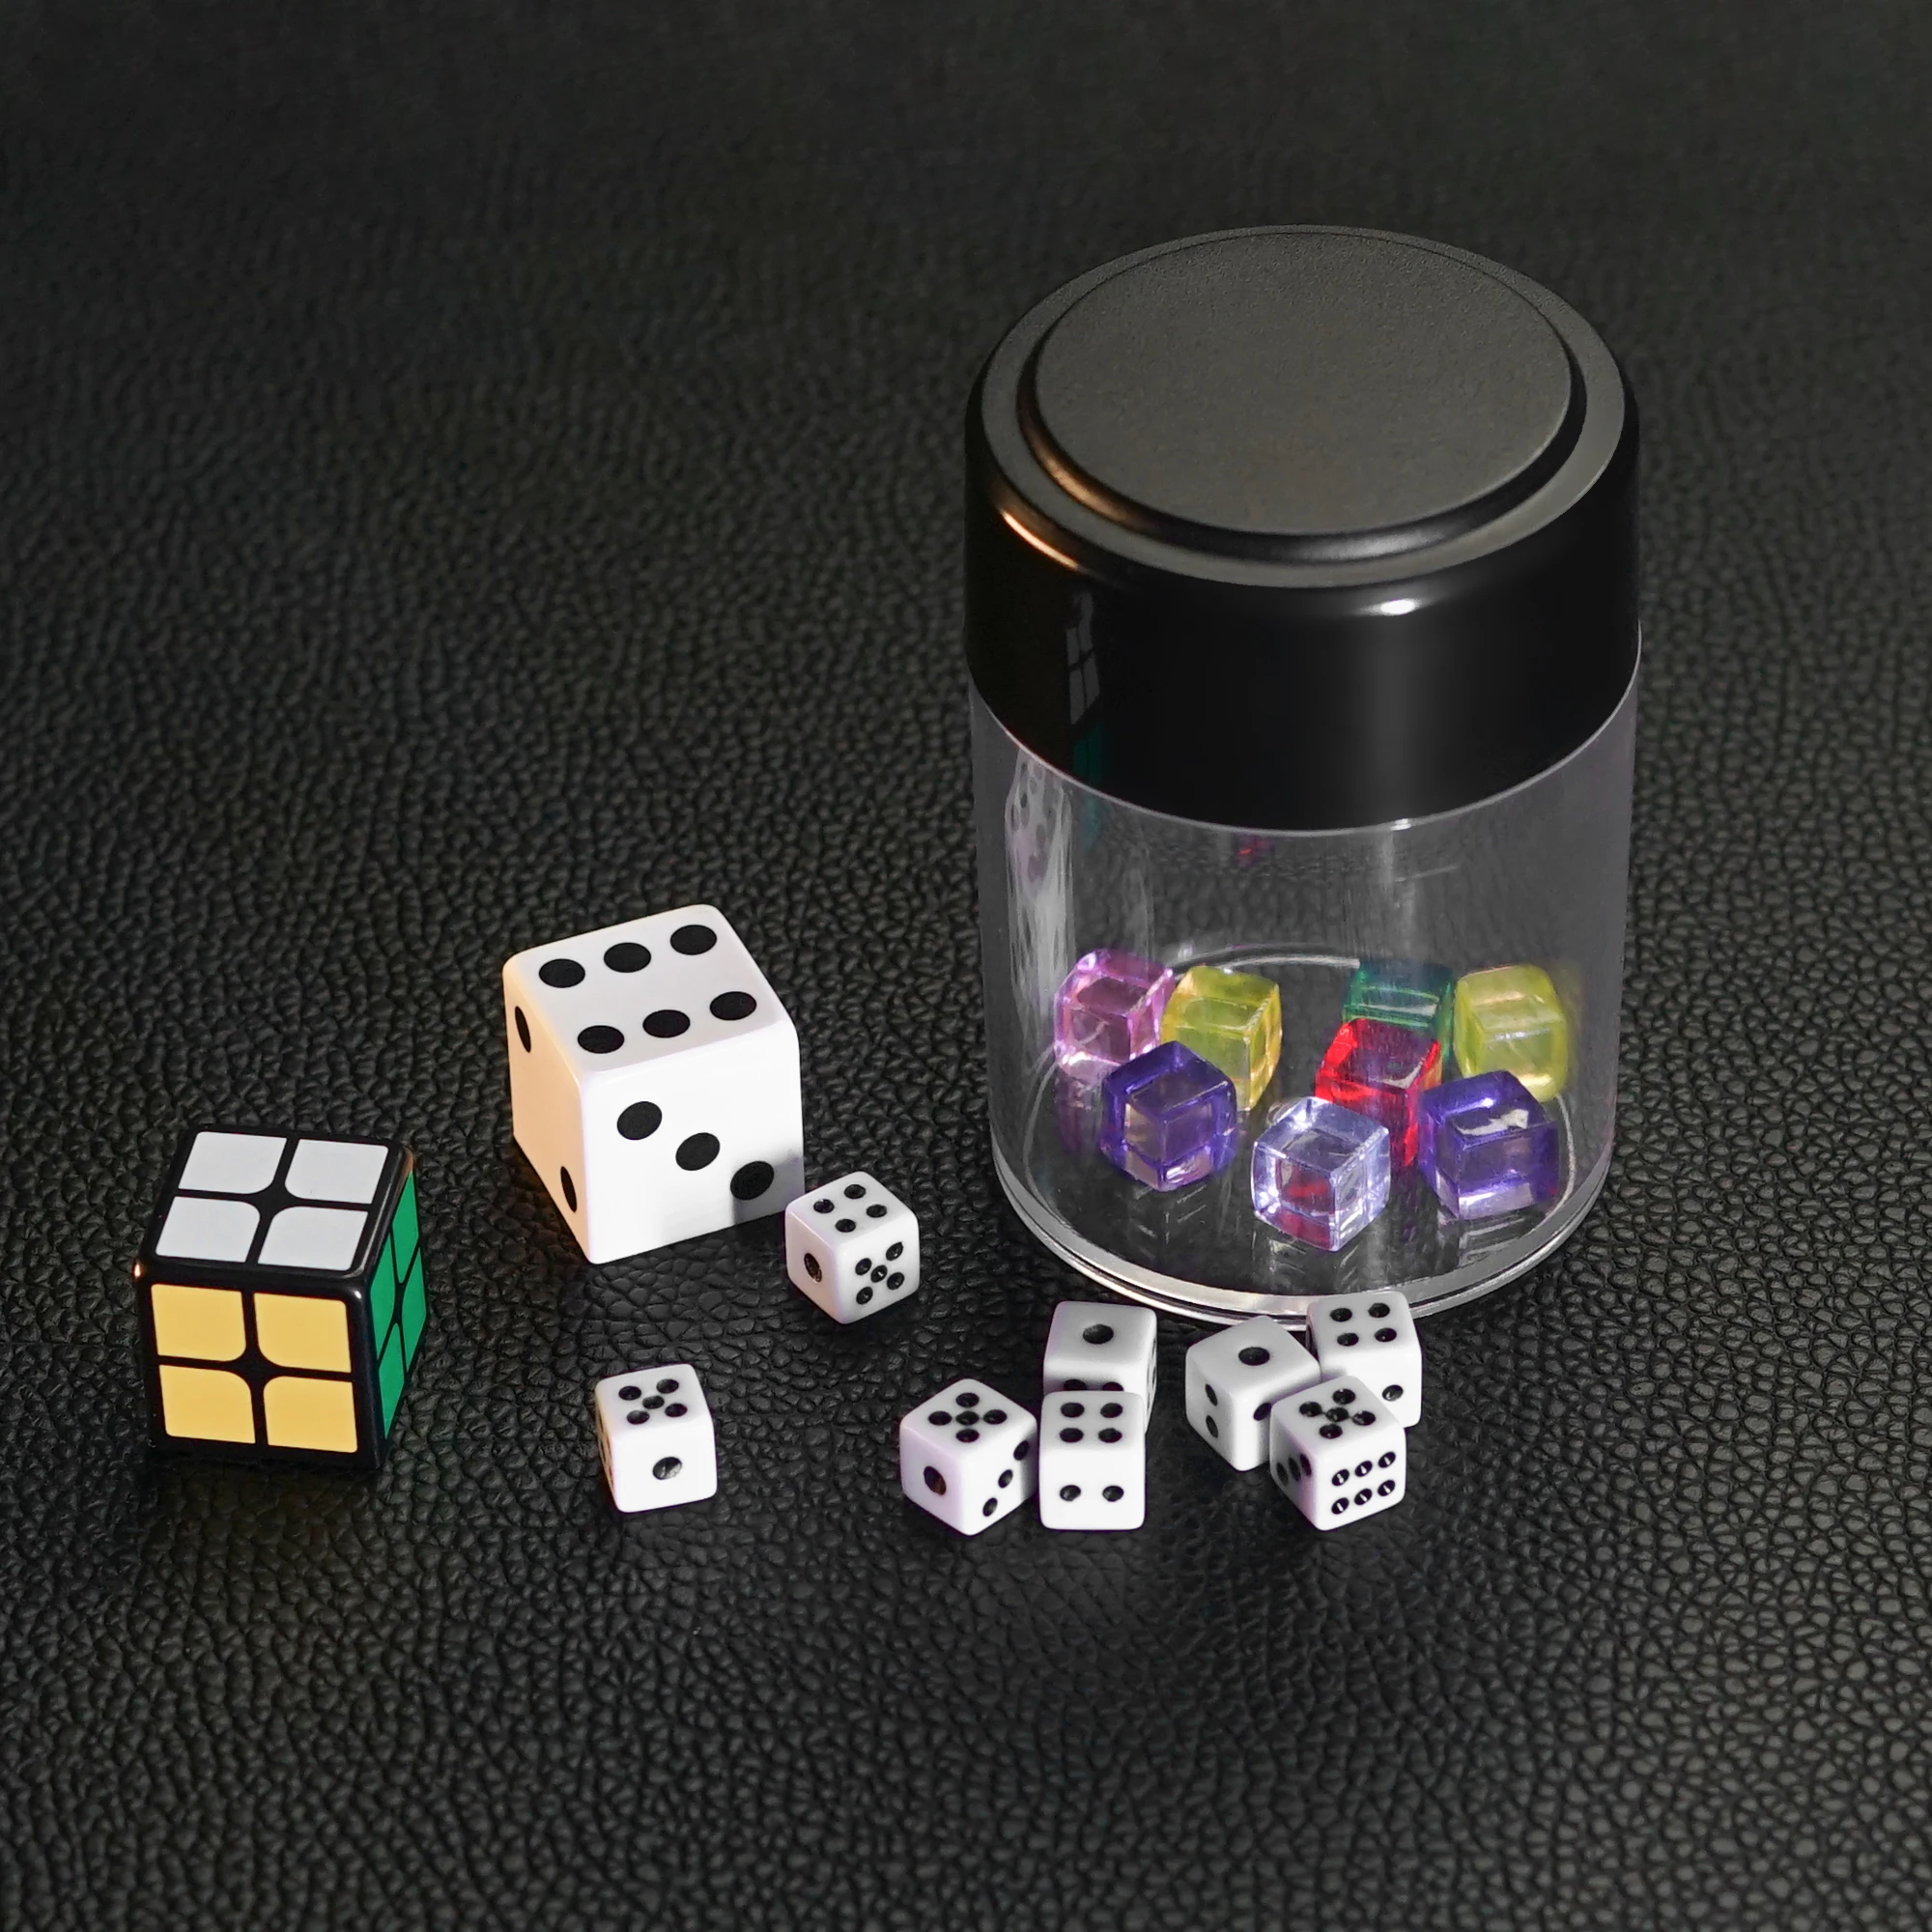 

Dice Explosion By IARVEL Cube MAGIC Tricks Magie Props Mentalism Close Up Street Magician Illusion Gimmick